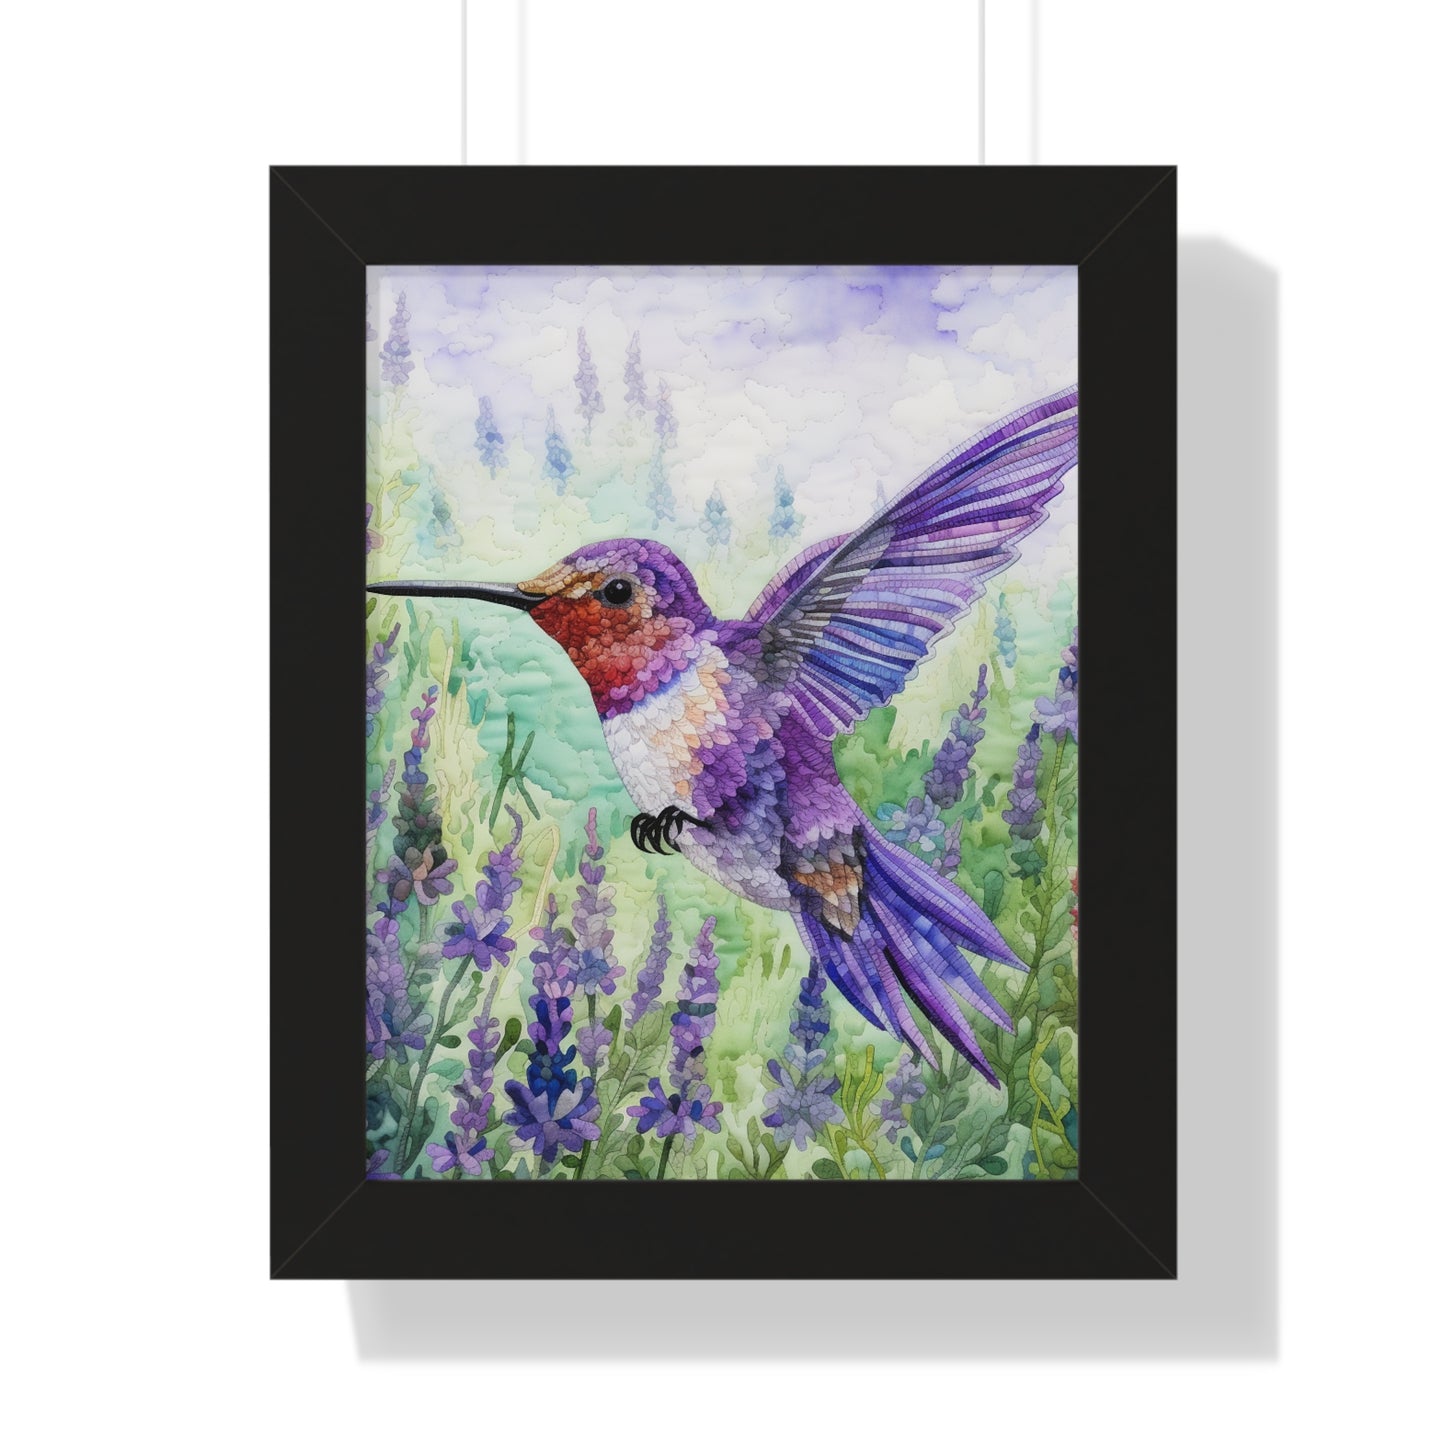 Threaded Wings: A humming's birds dance in a lavender field (Series 4)